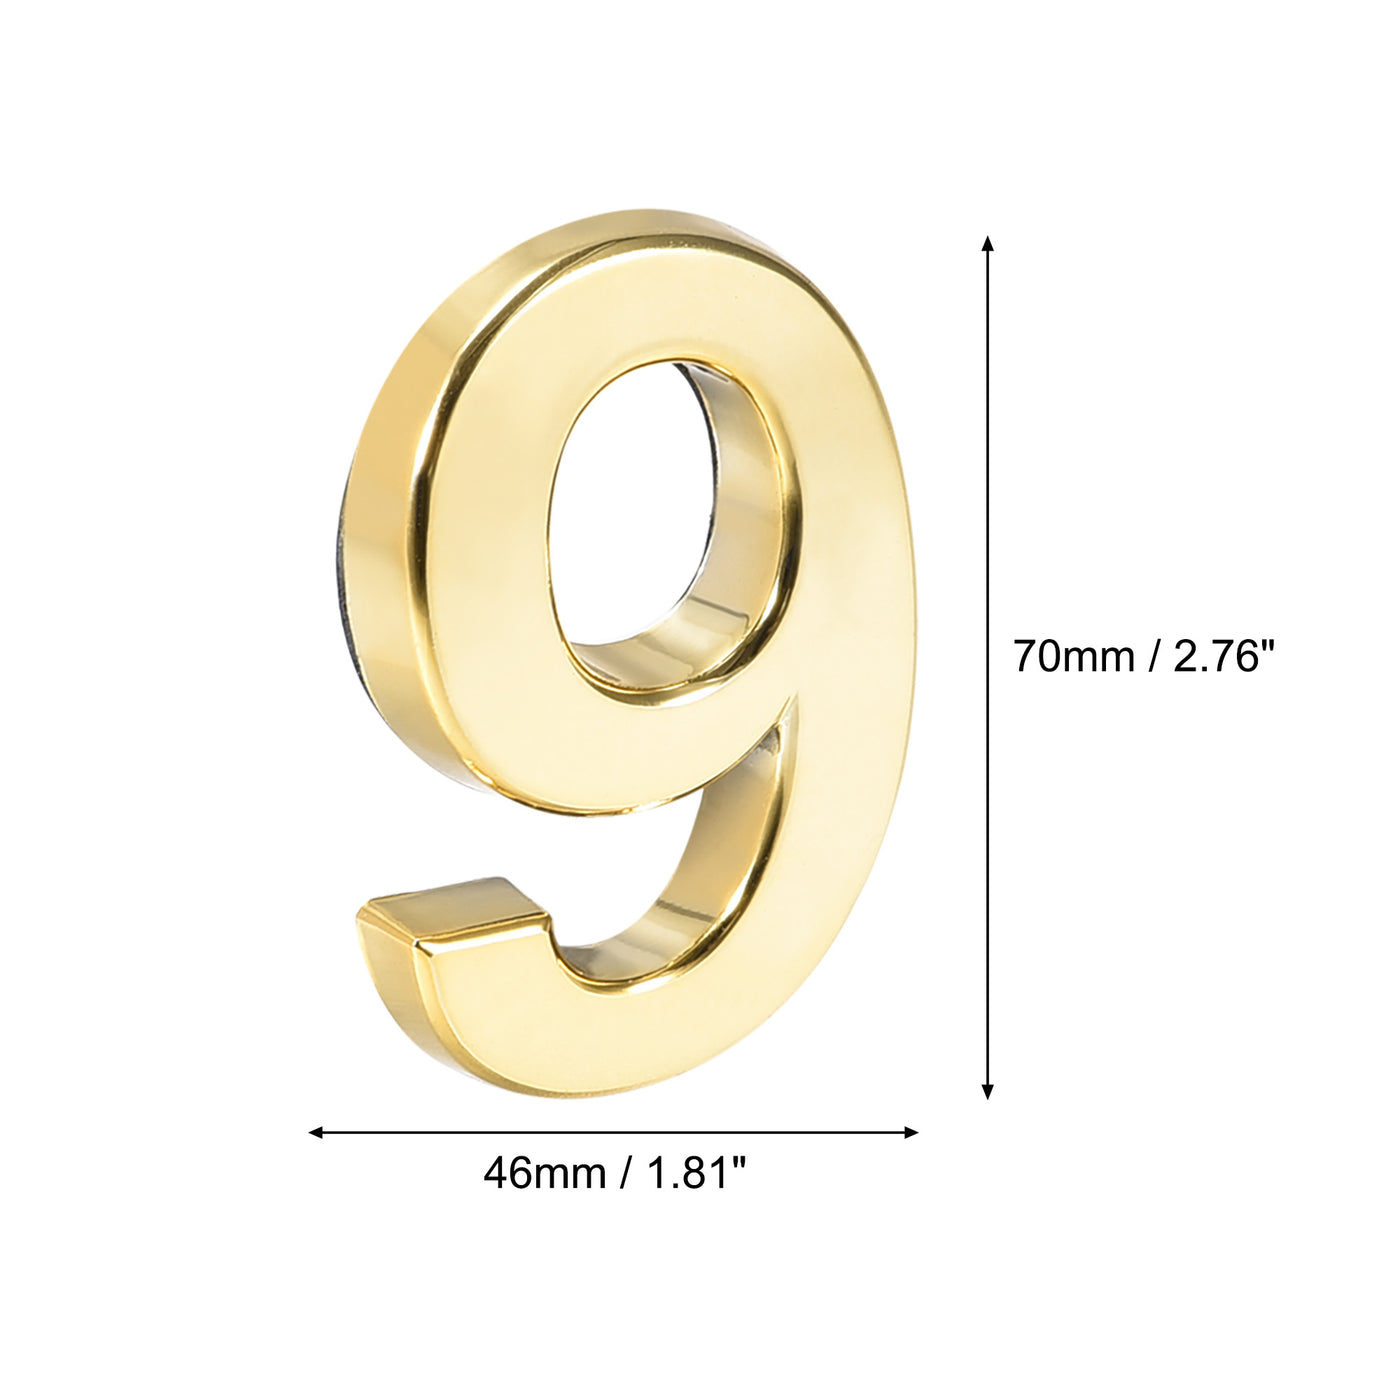 Uxcell Uxcell Self Adhesive House Number, 2.76 Inch ABS Plastic Number 3 for House Hotel Mailbox Address Sign Gold Tone 2 Pcs